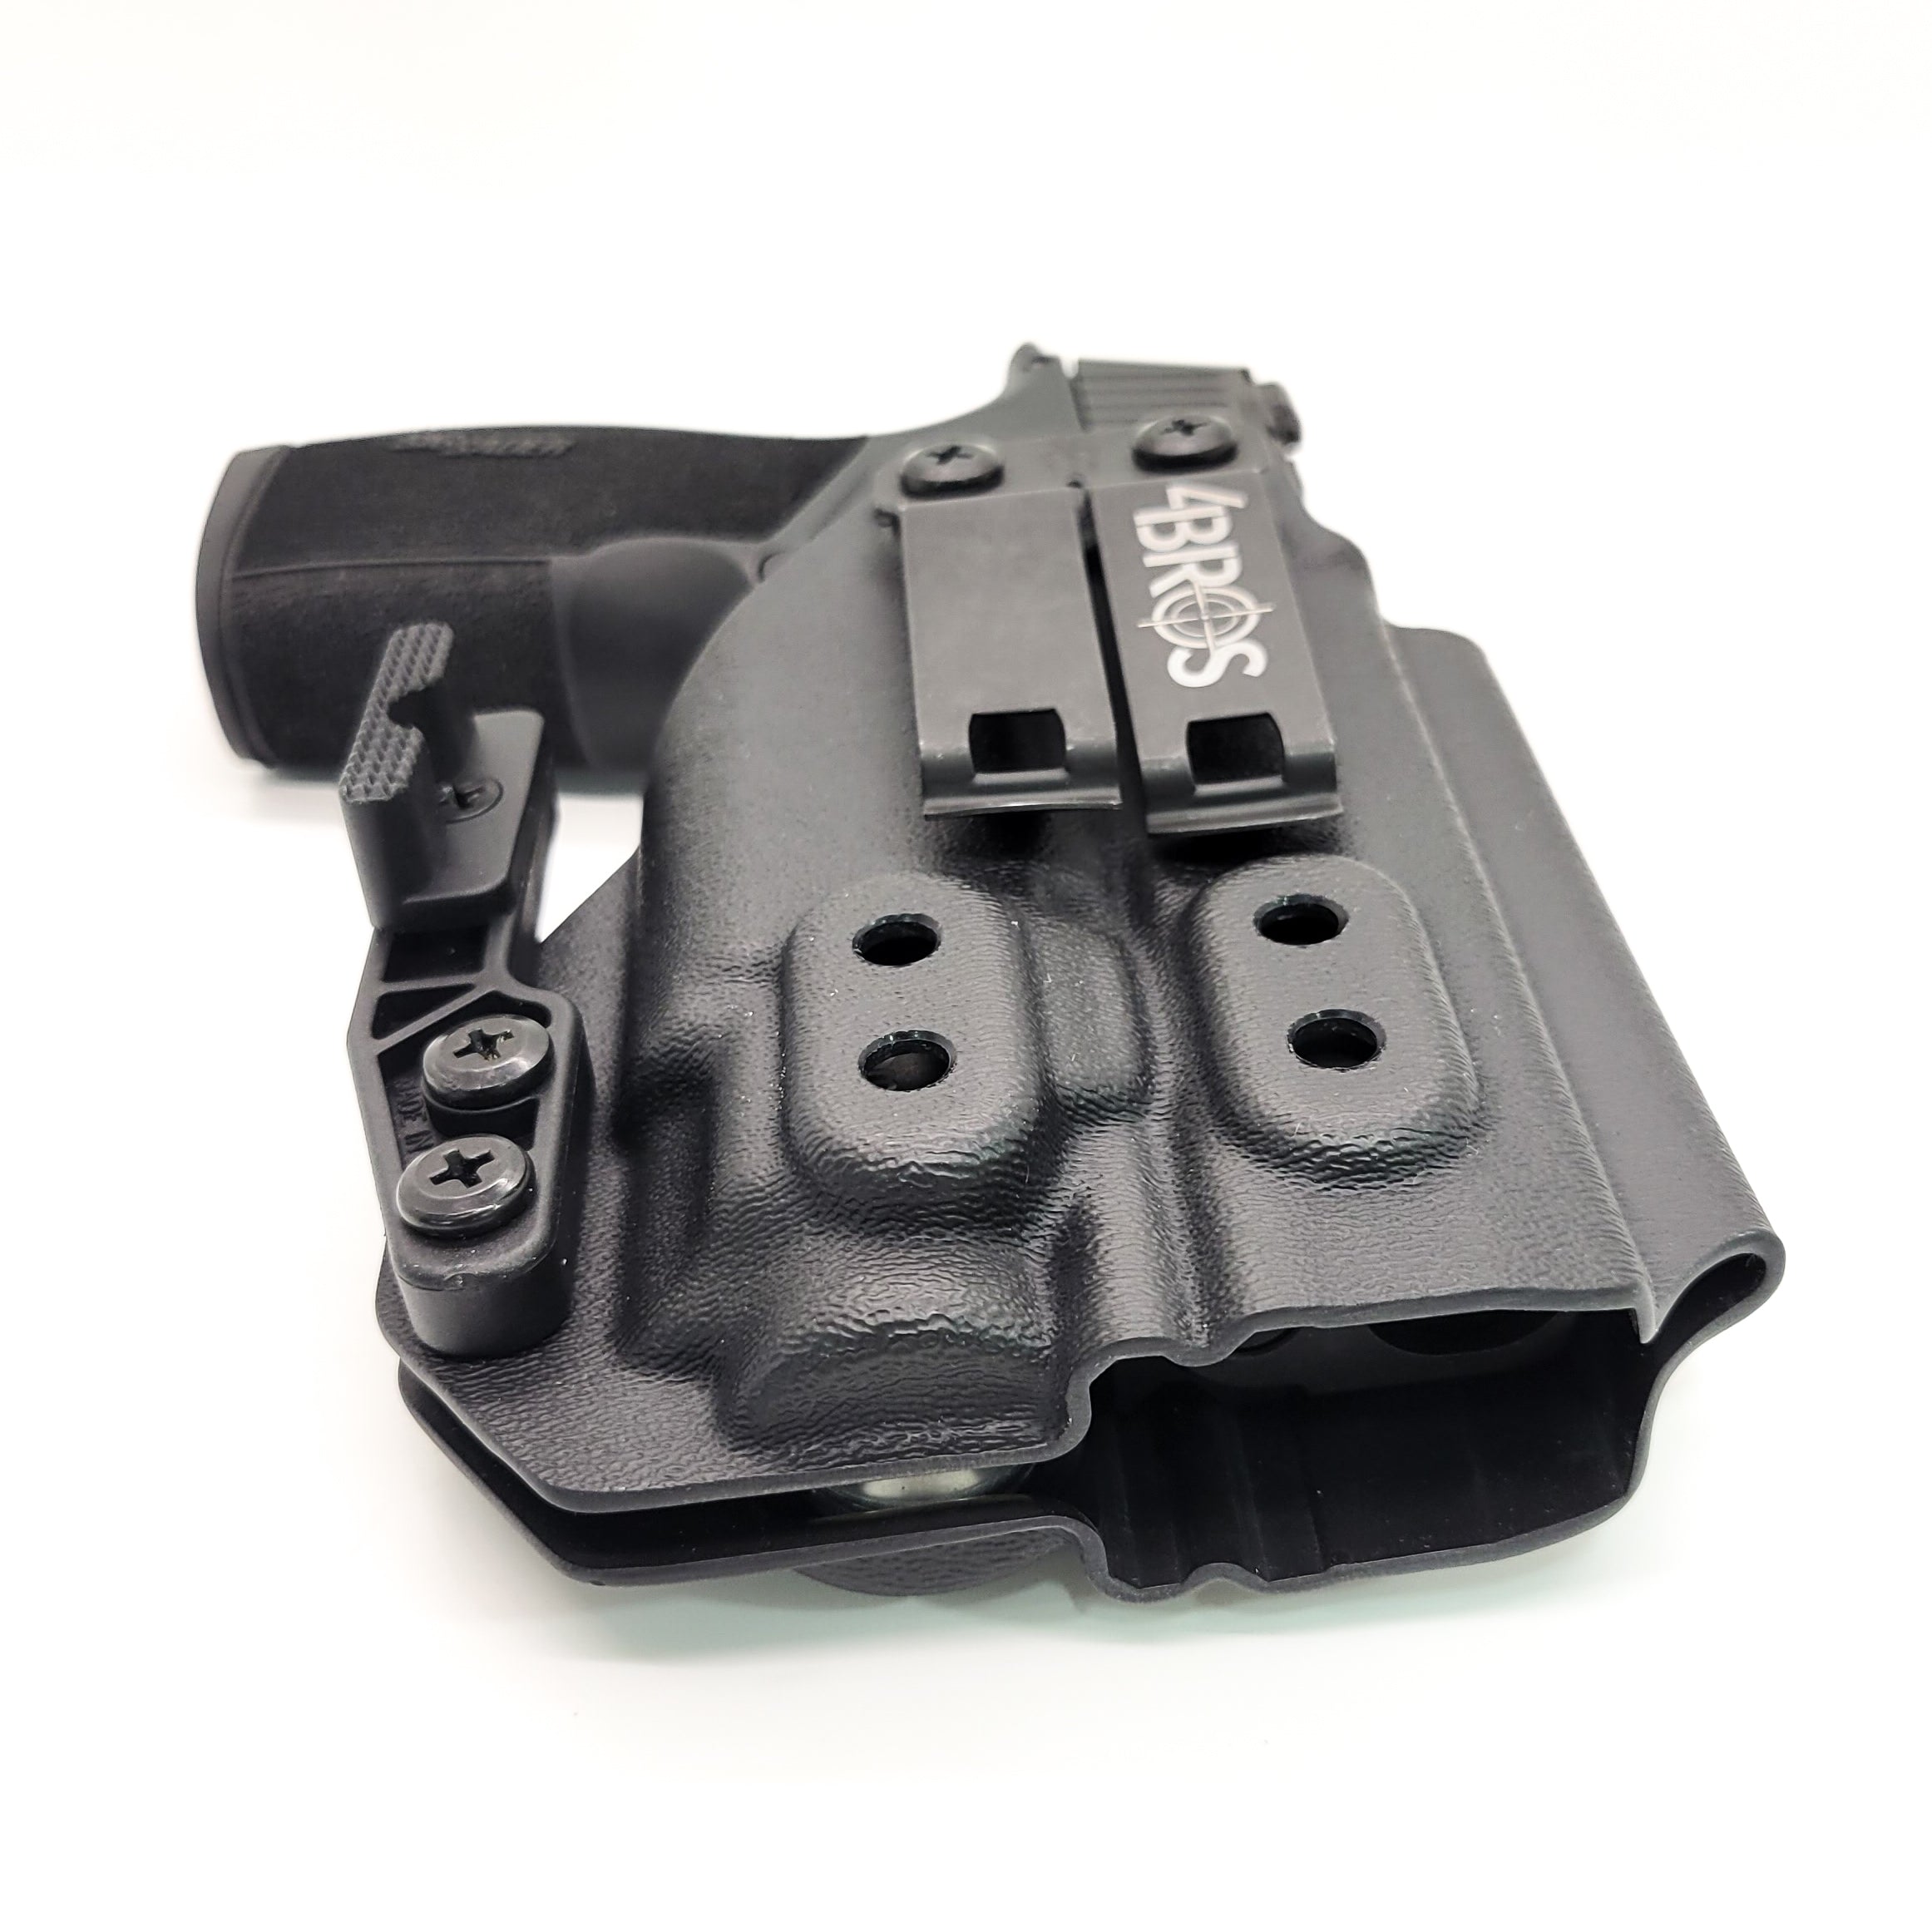 For the best Inside Waistband Kydex Holster designed to fit the Sig Sauer P365-XMACRO with Streamlight TLR-8 Sub, shop Four Brothers Holsters. Full sweat guard, adjustable retention, minimal material & smooth edges to reduce printing. Made in the USA. Open muzzle for threaded barrels, cleared for red dot sights. MACRO